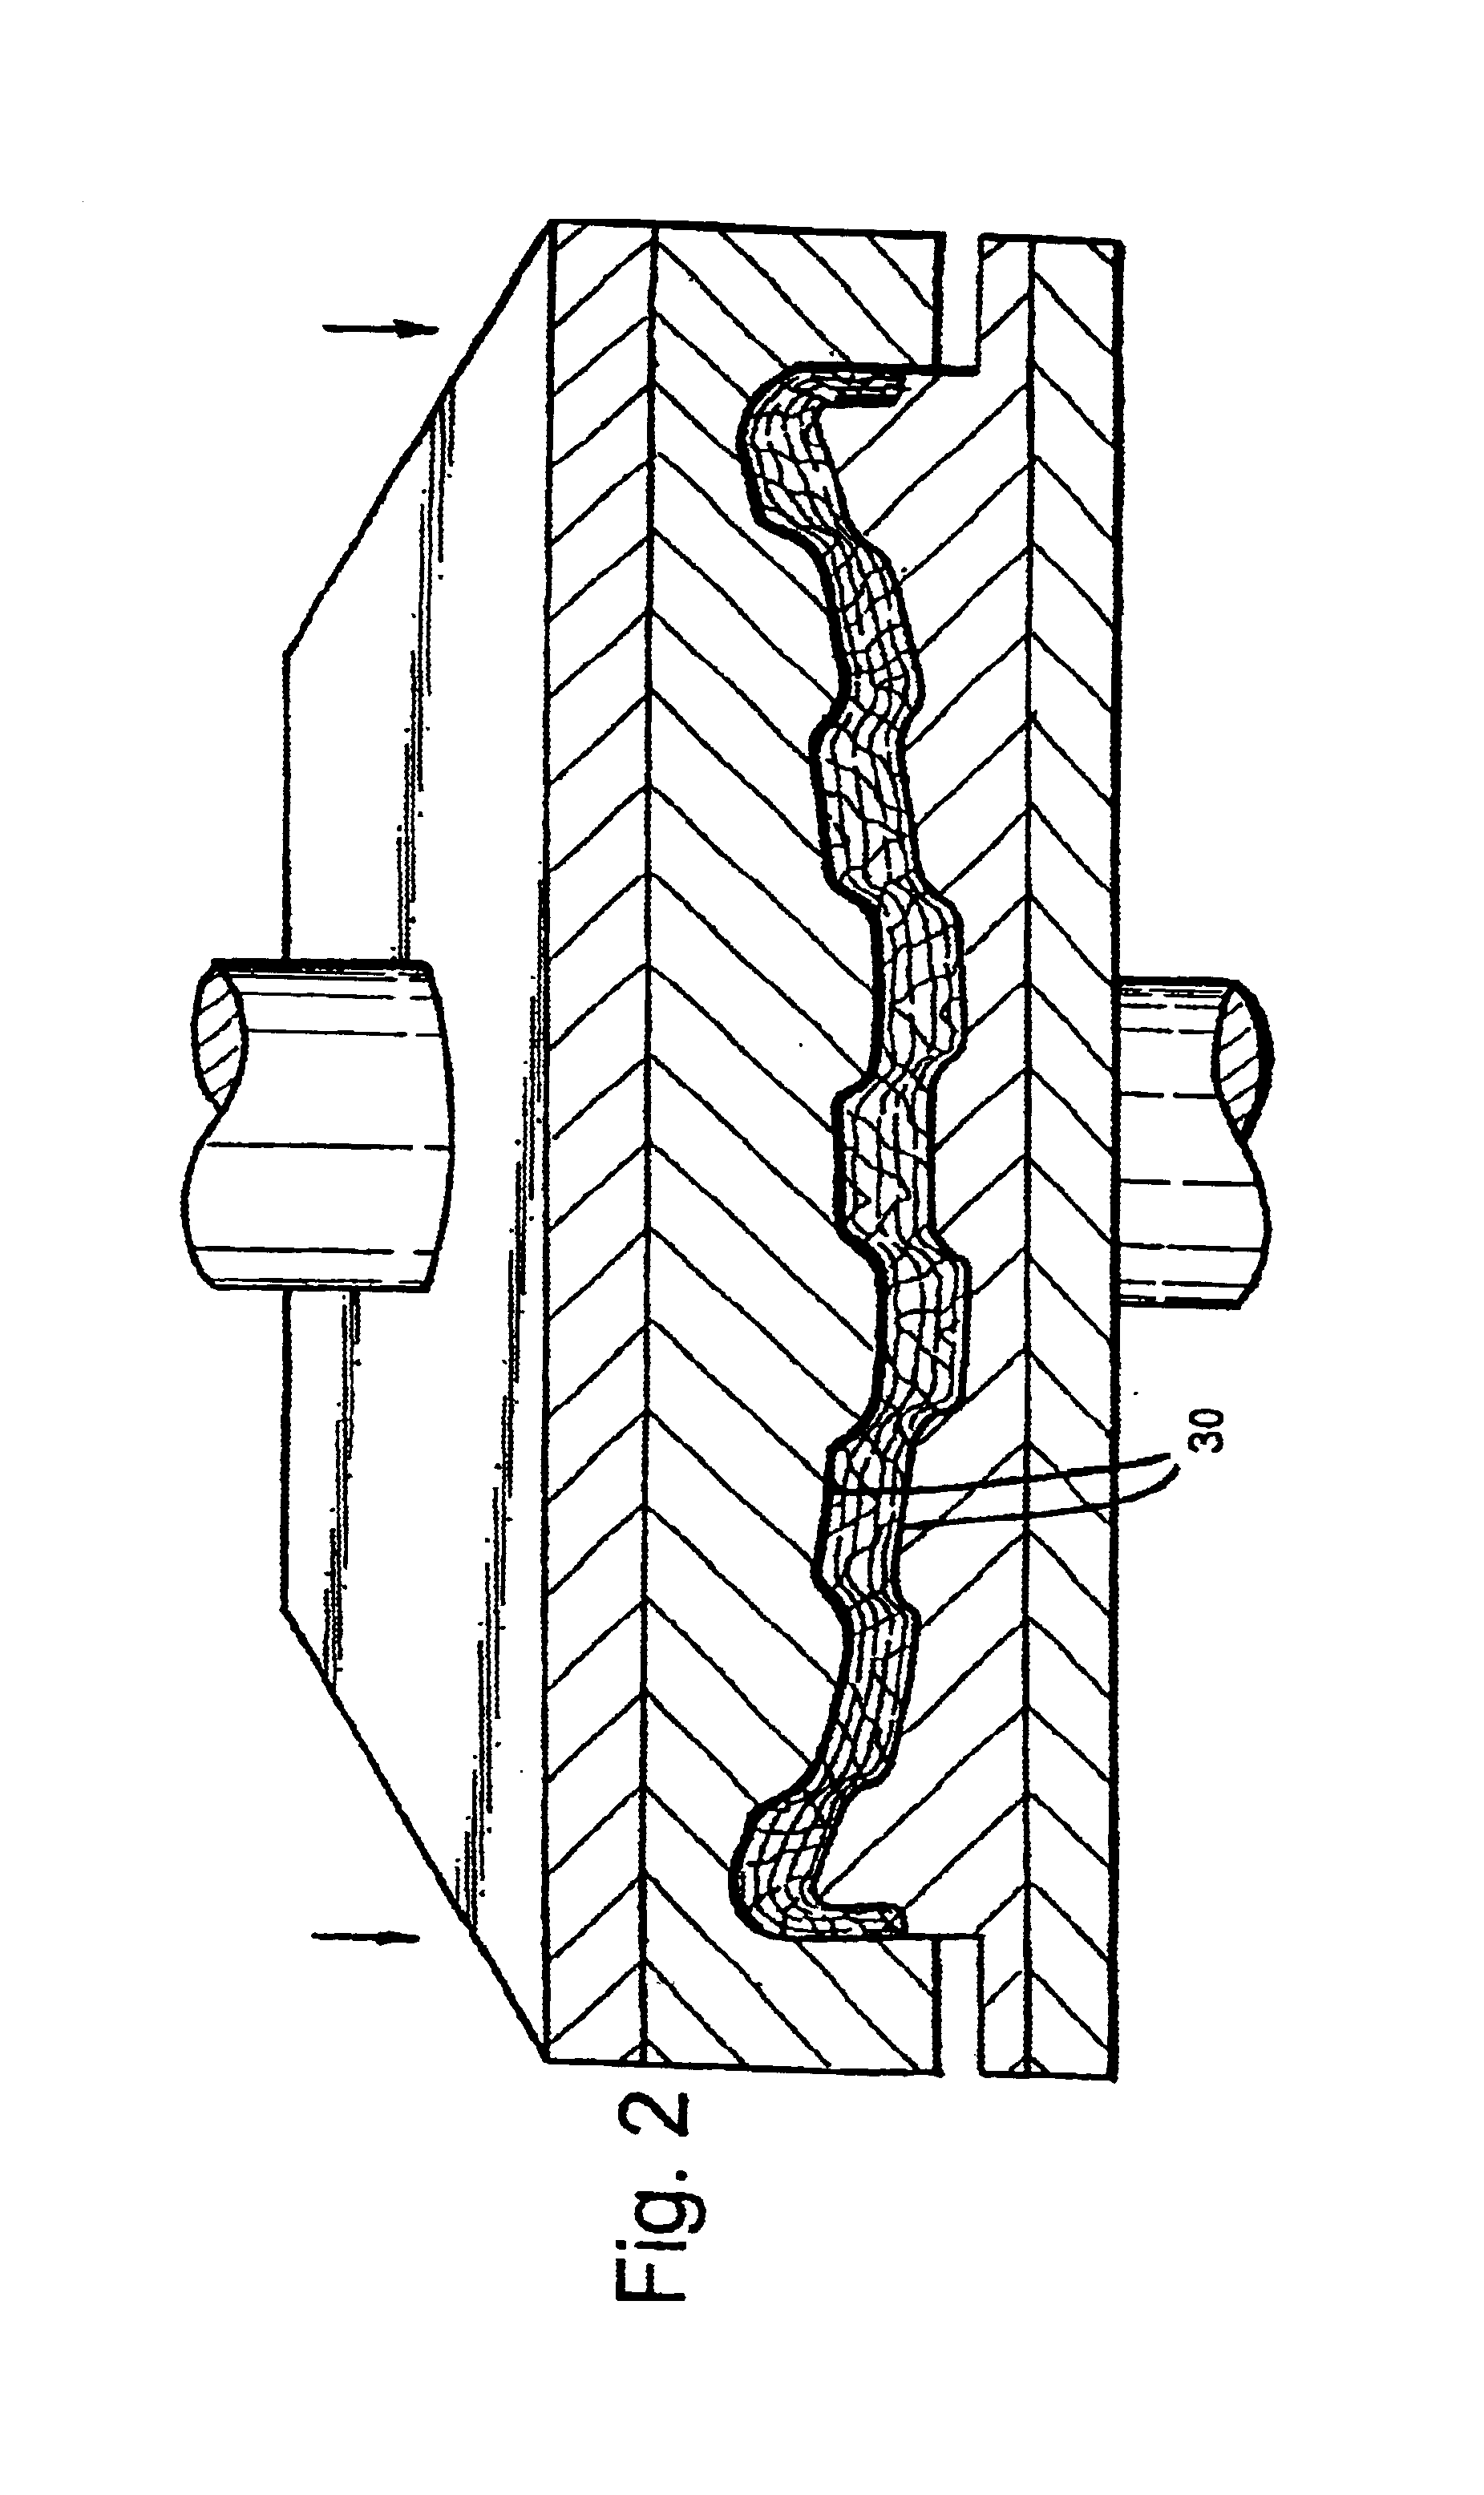 Wood strand molded parts having three-dimensionally curved or bent channels, and method for making same